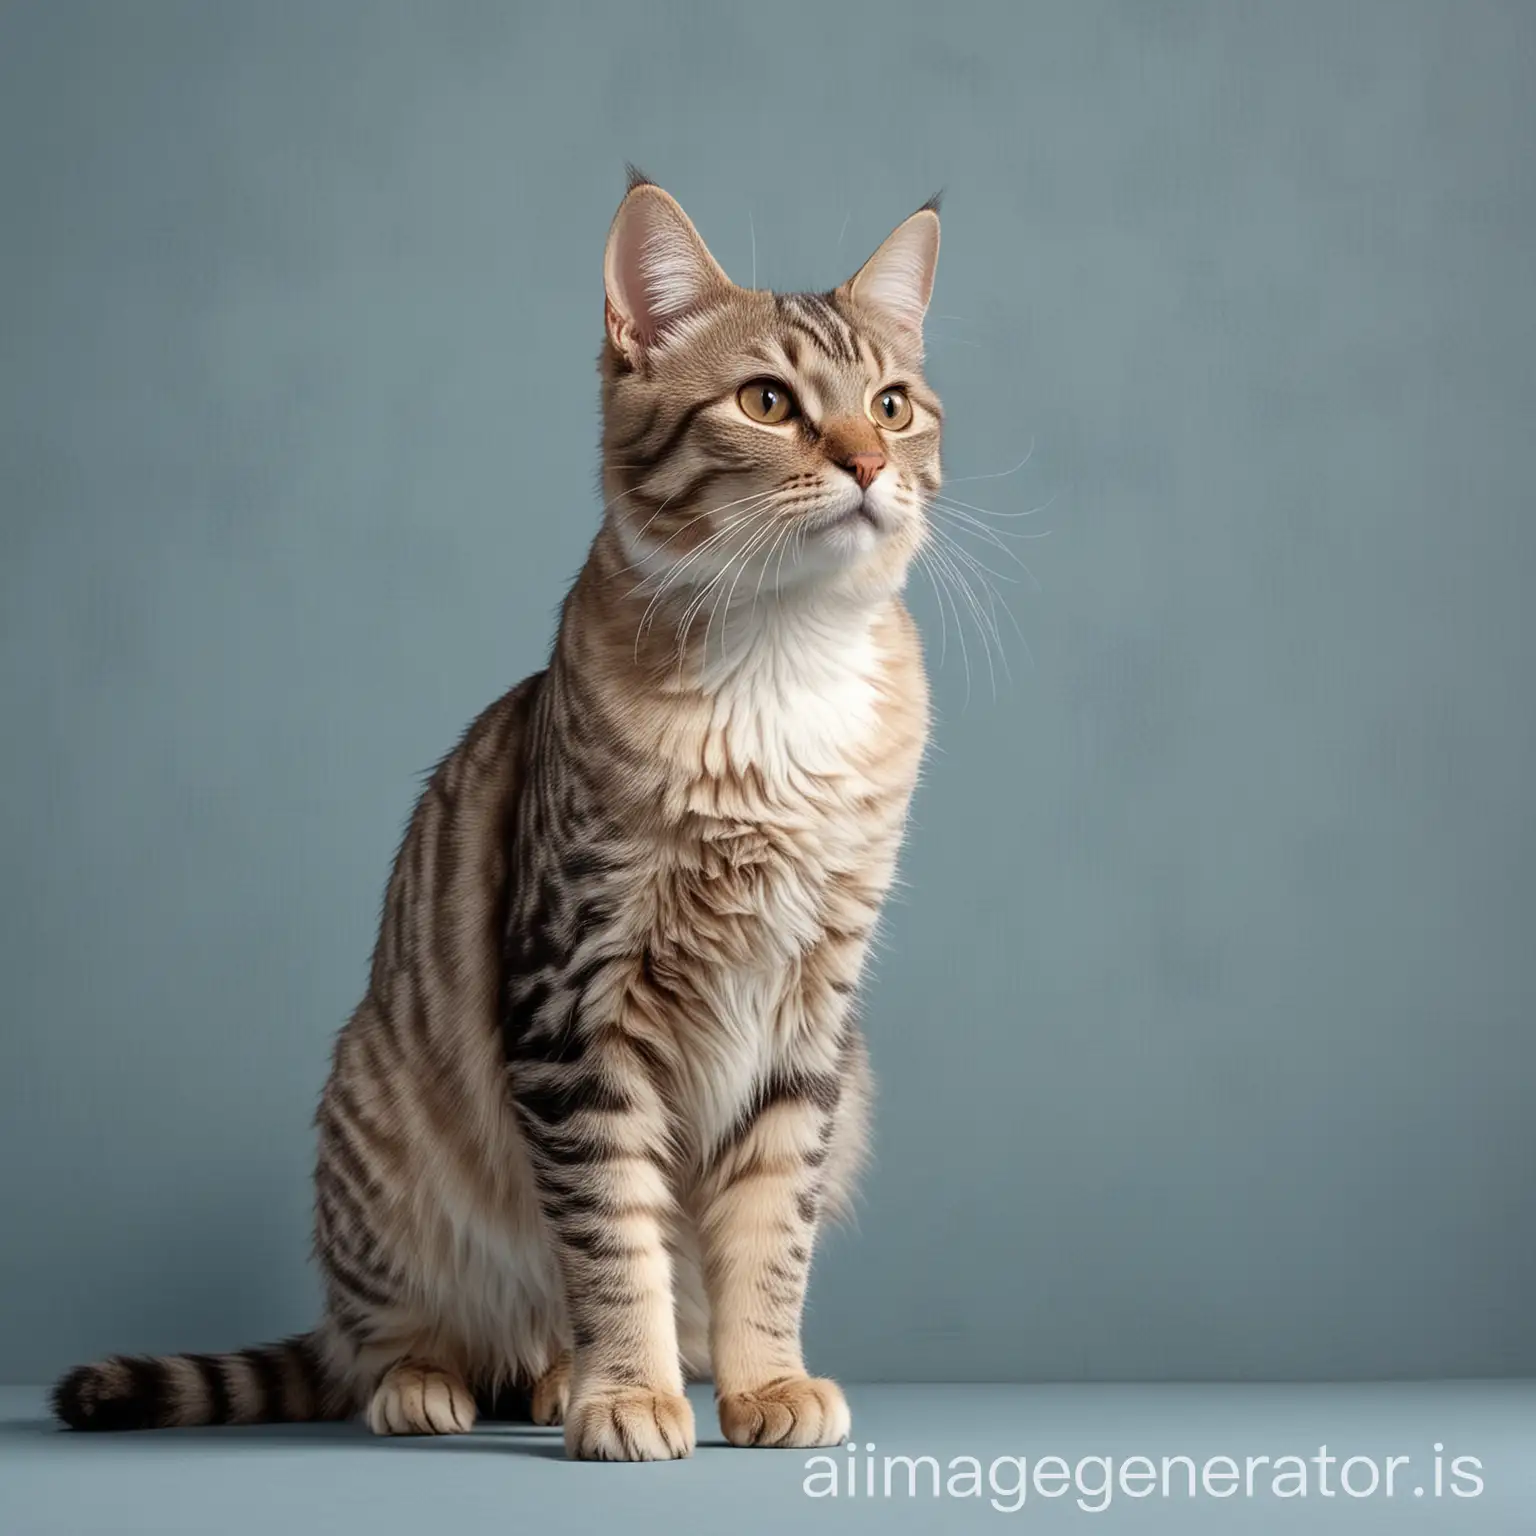 american bobtail cat standing against a sky blue wall with a greyish shade. the image should be of width 330px and height 300px. The image should be realistic and more rendering